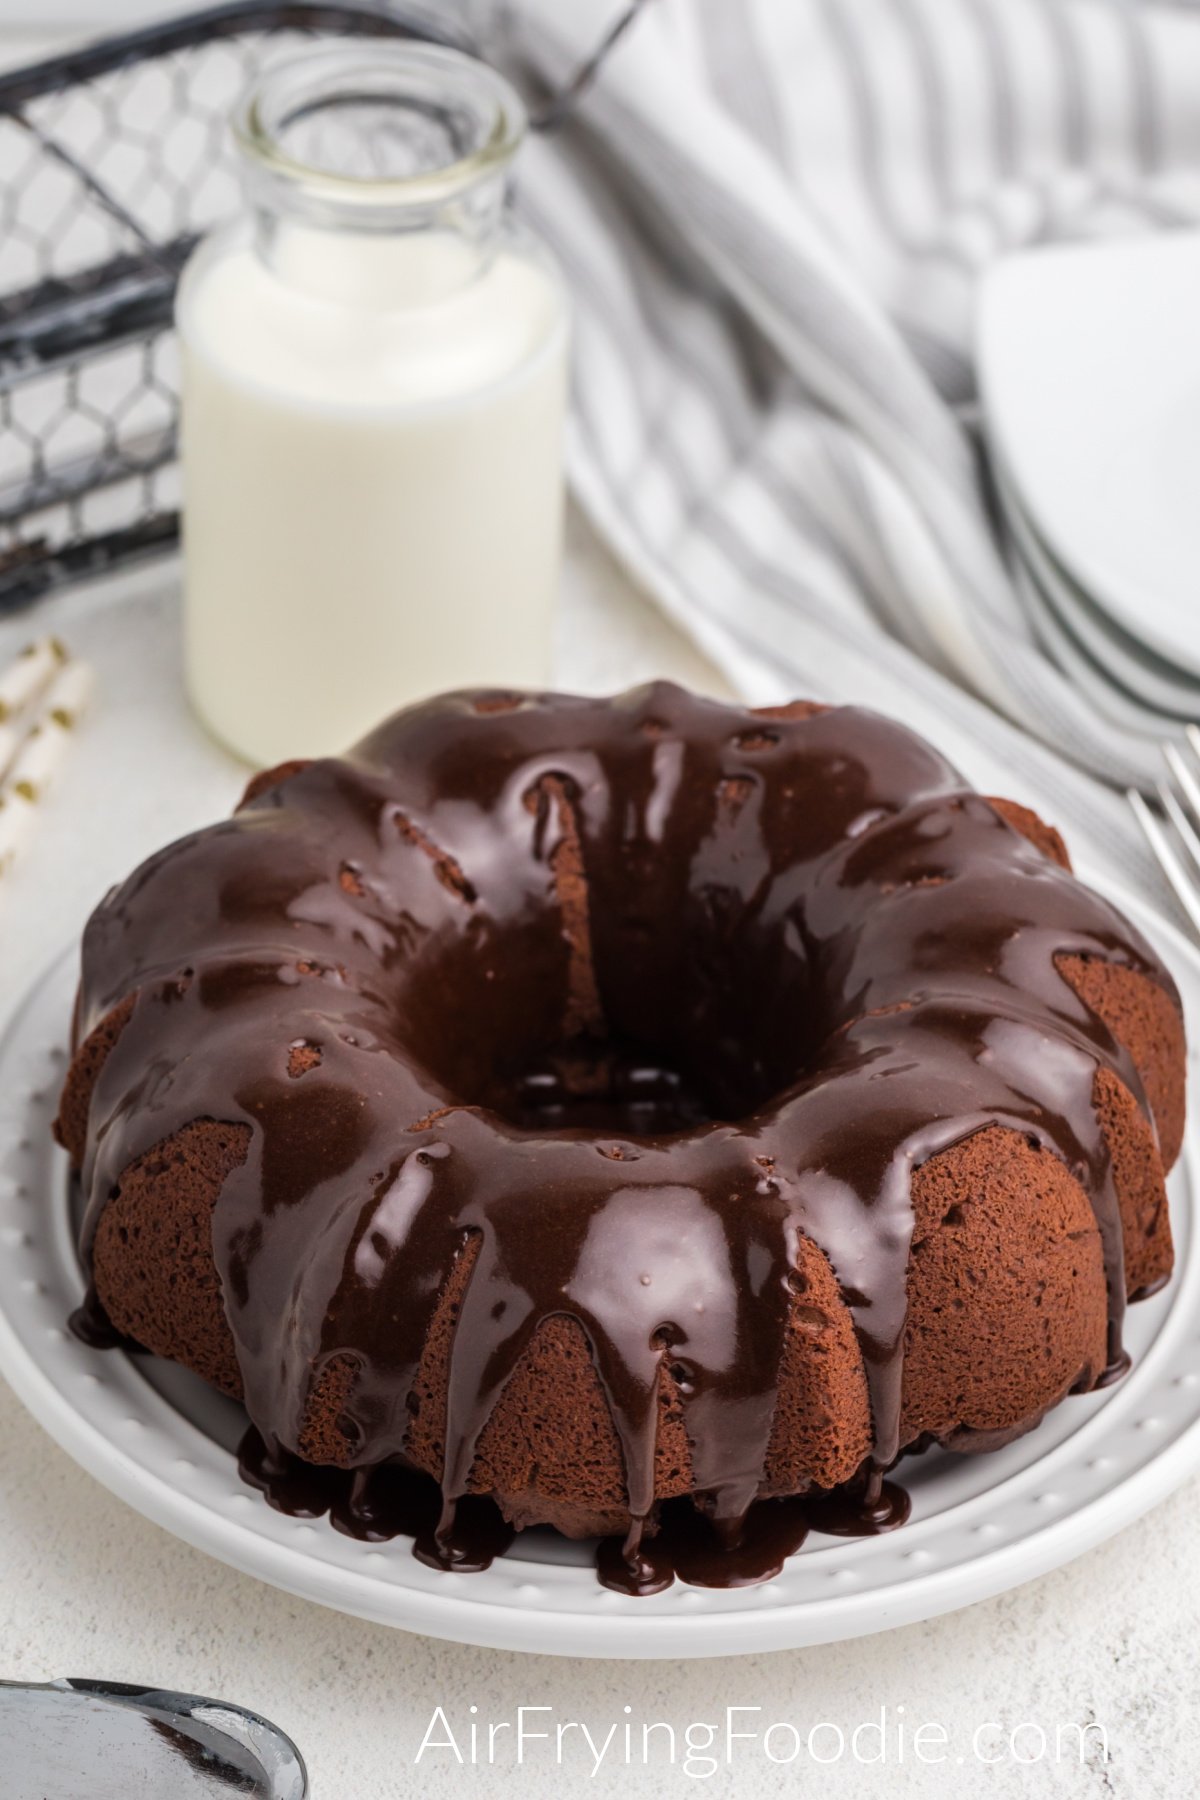 Air Fryer Chocolate Bundt Cake with chocolate frosting ready to slice and serve.